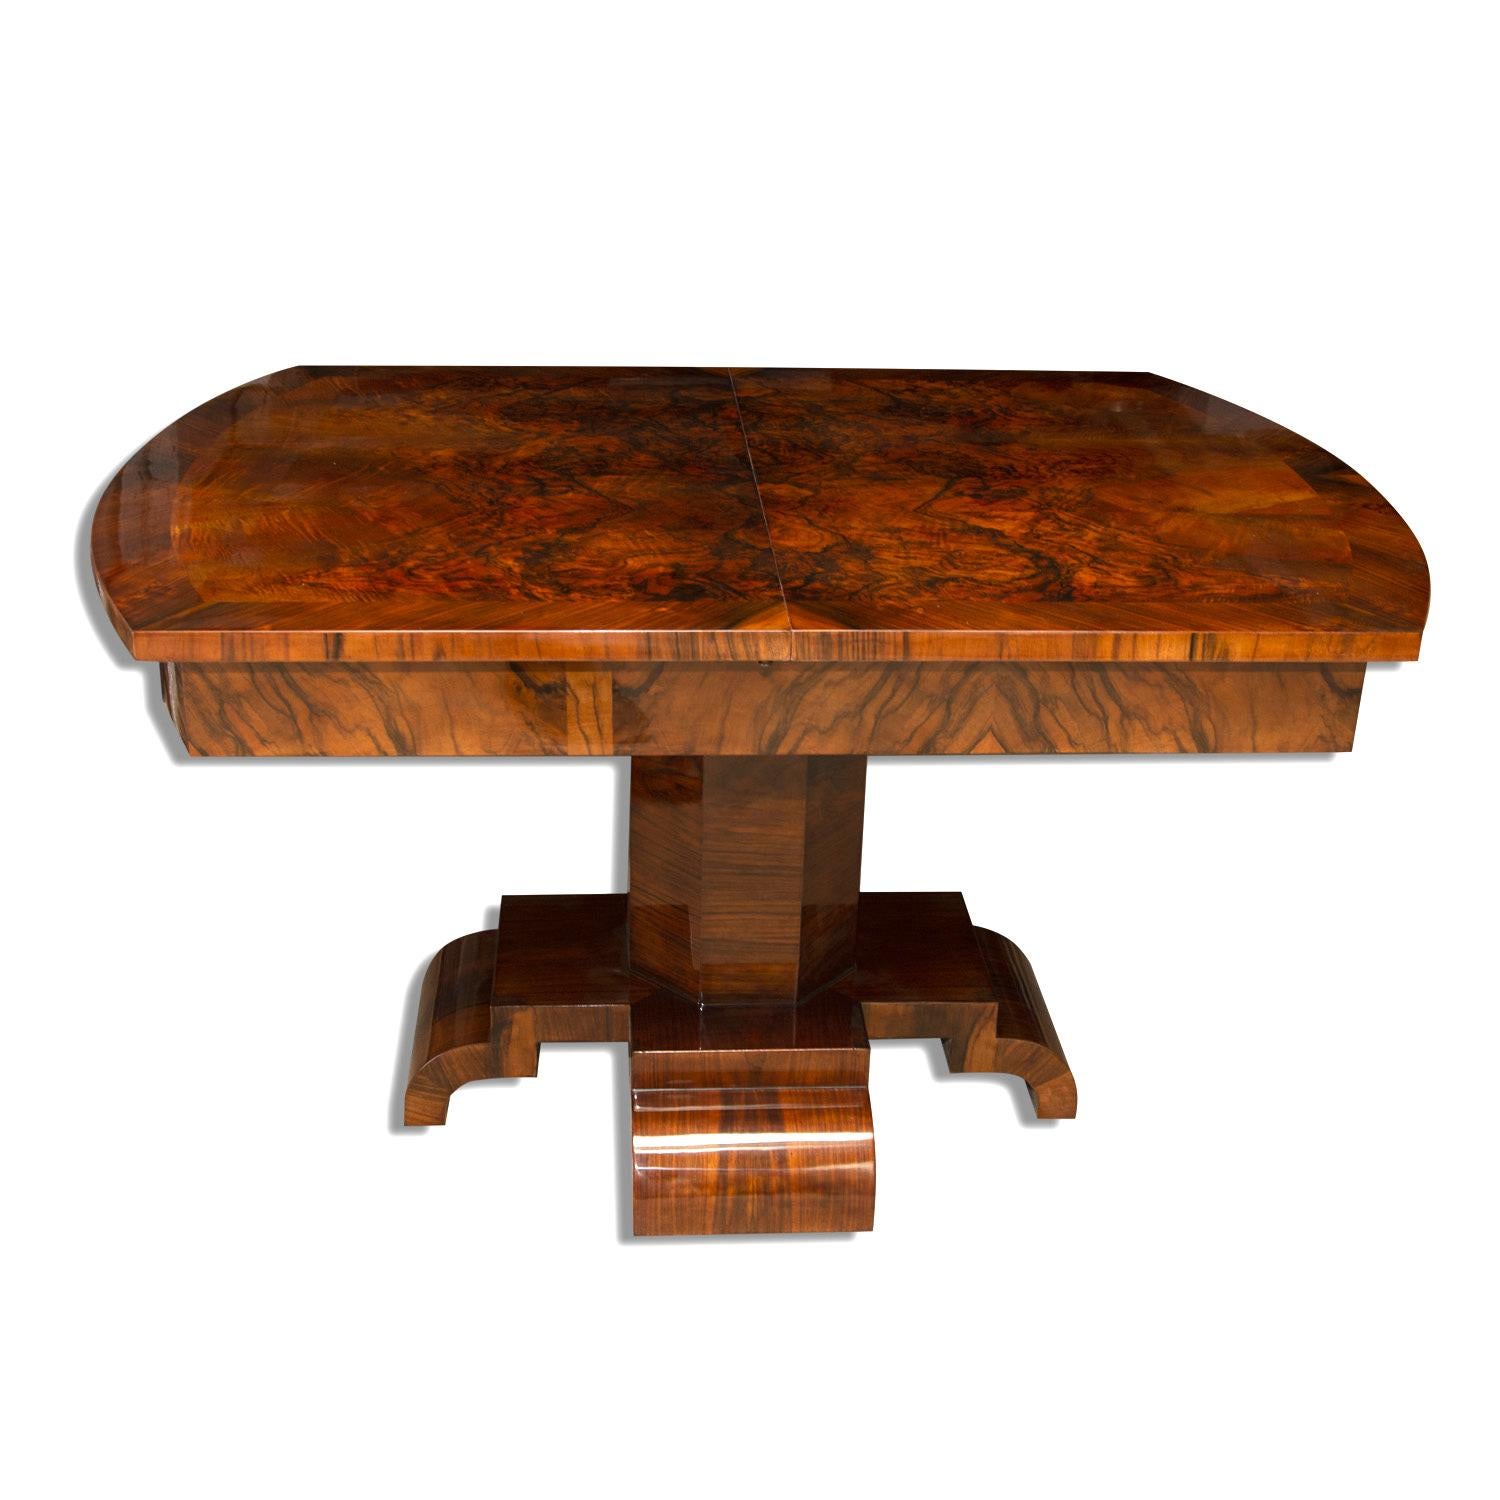 This adjustable Art Deco dining table was made in the 1930s in Central Europe. The table is originally intended for 6-8 people. It features a solid wood with walnut veneer. It was professionally renovated; the wood has been polished to a high gloss